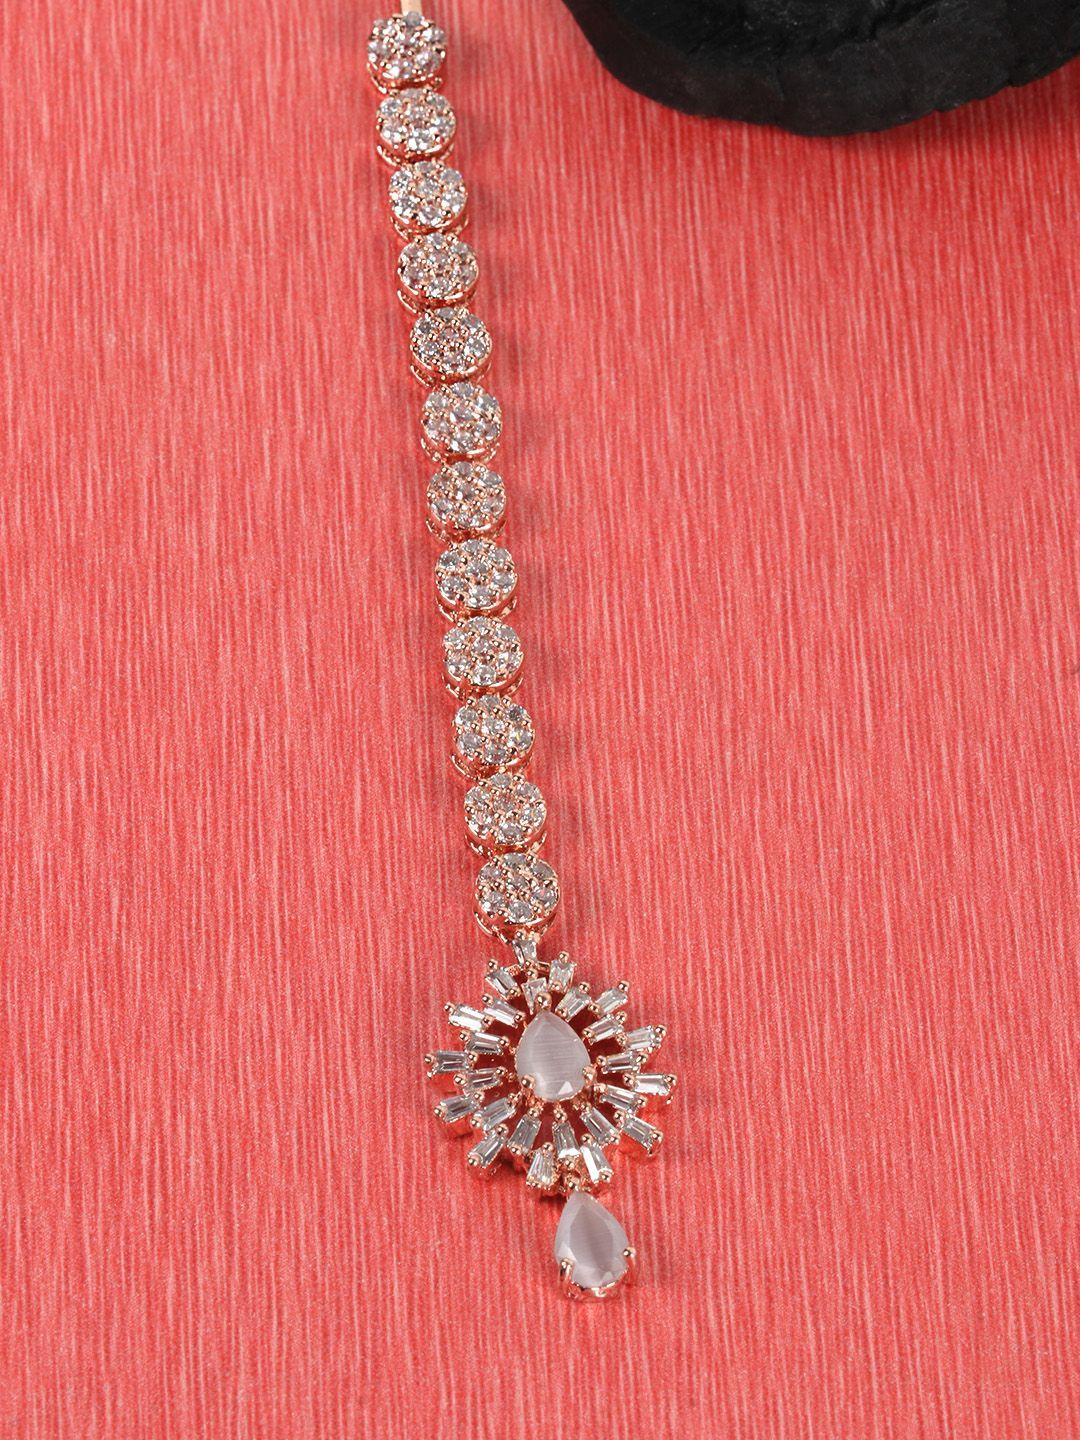 jewels-gehna-rose-gold--plated-&-grey-cz-stone-studded-handcrafted-maang-tika